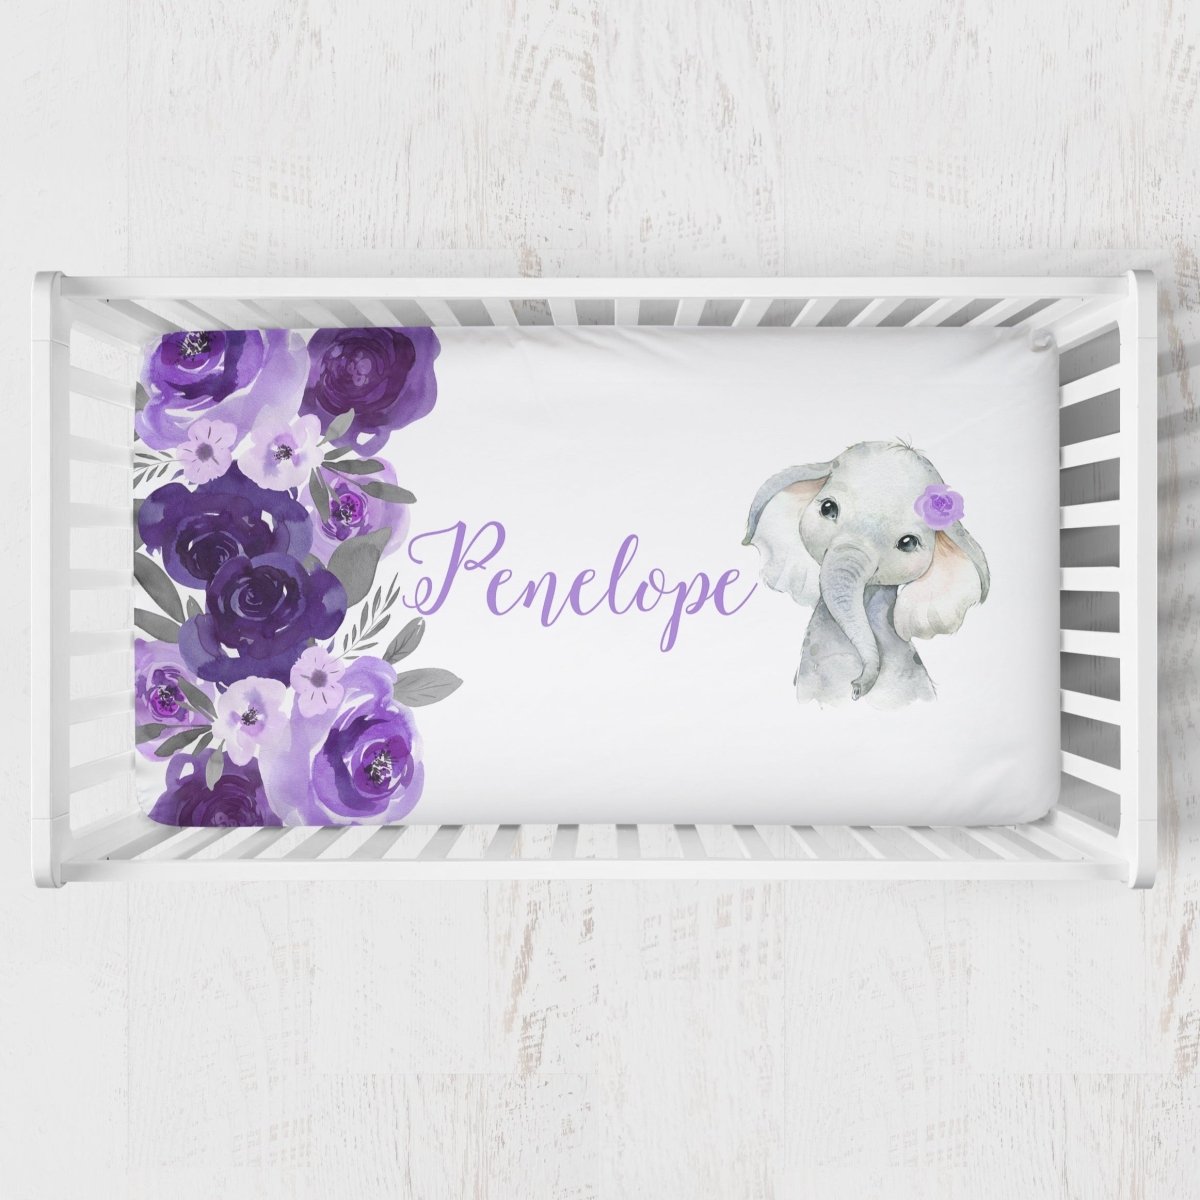 Purple Floral Elephant Personalized Crib Sheet - gender_girl, Personalized_Yes, text